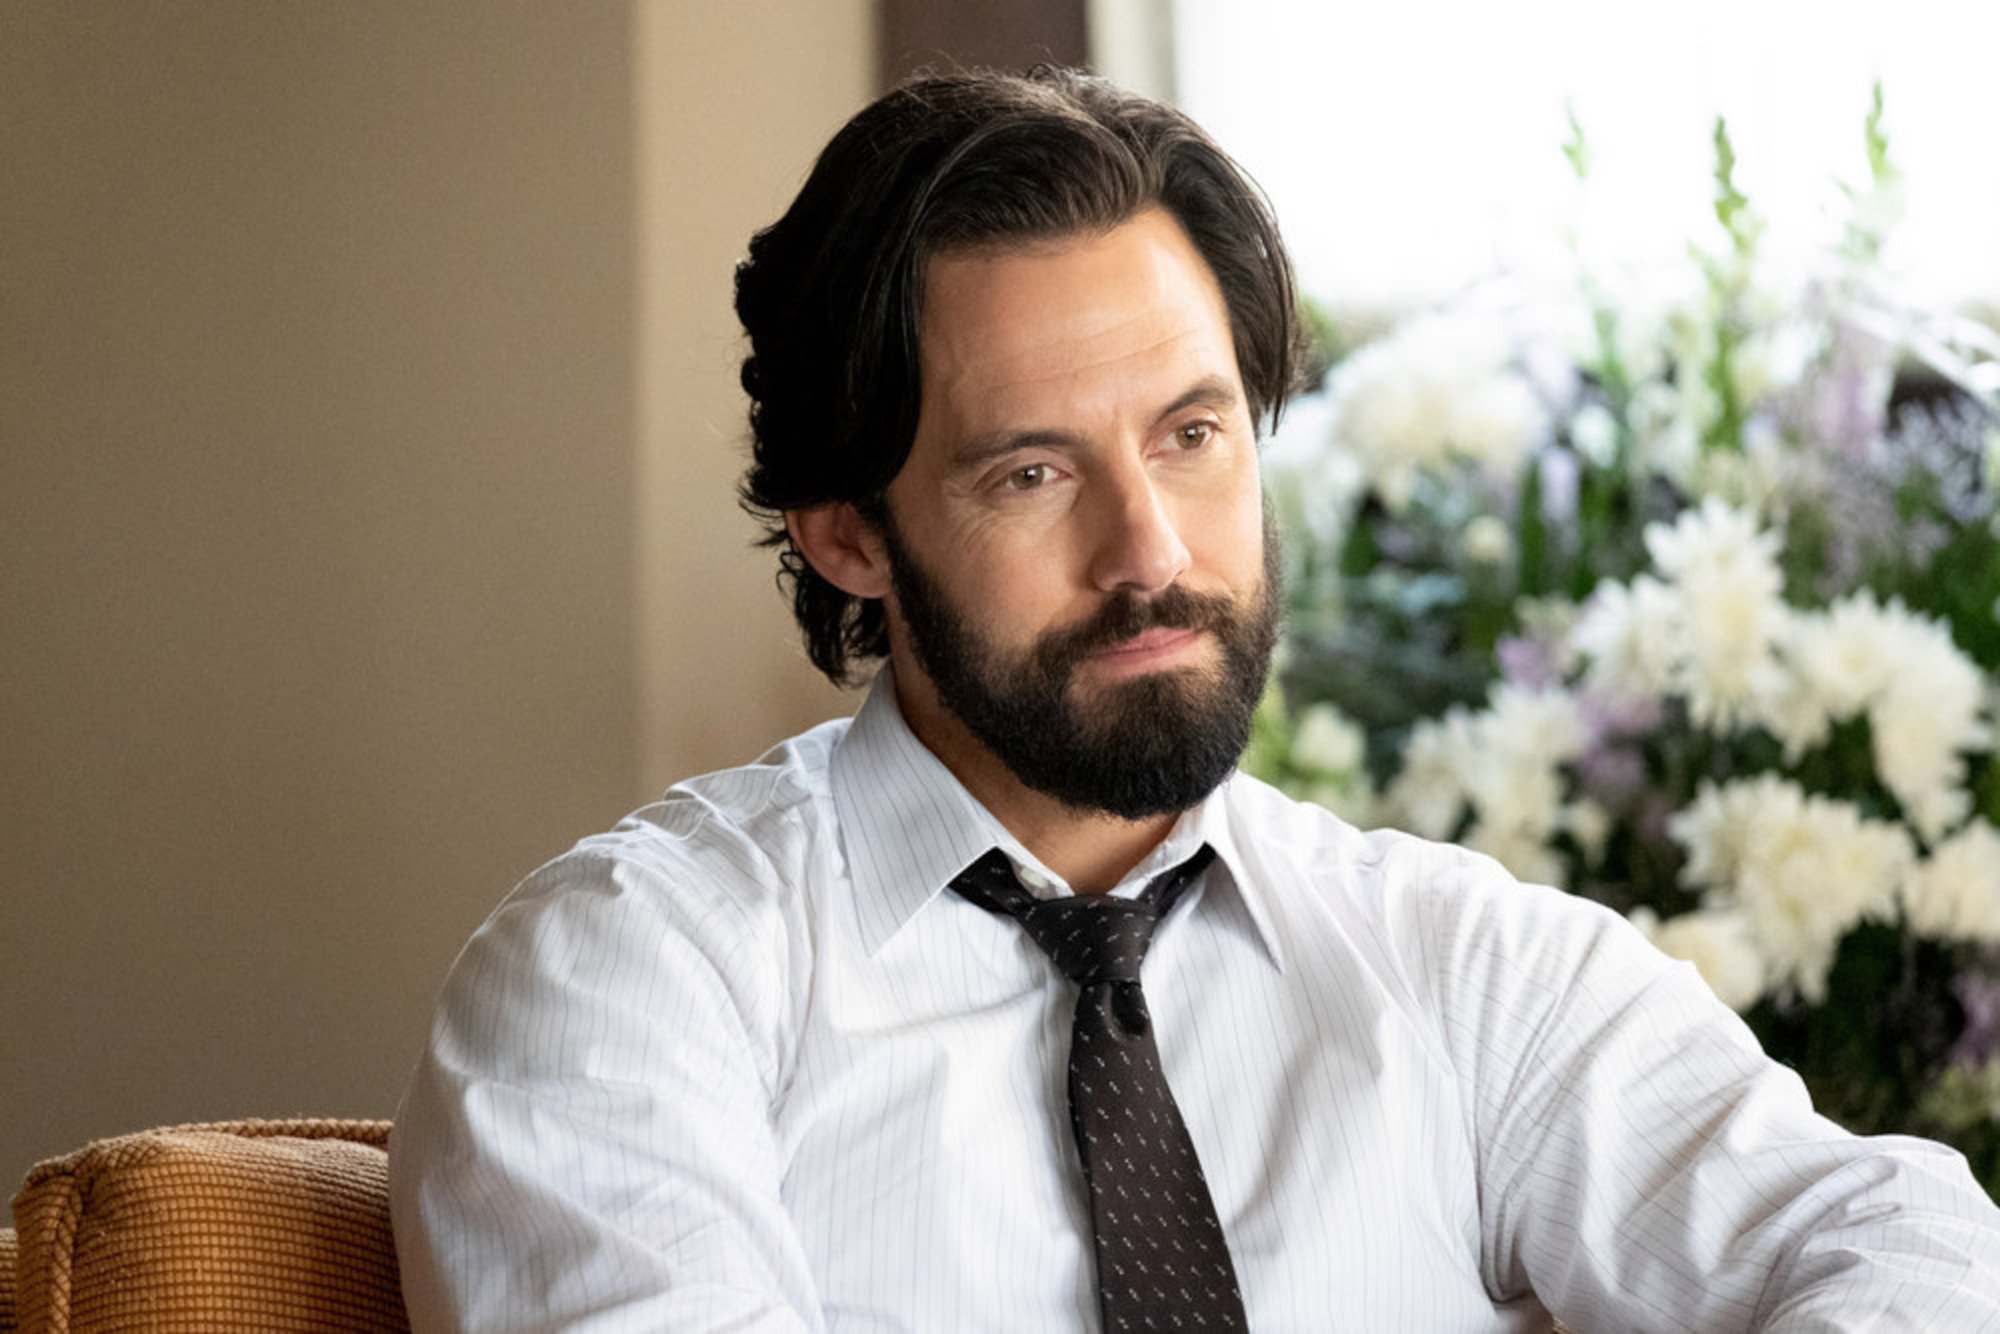 Milo Ventimiglia as Jack Pearson in 'This Is Us' Season 6. He's wearing a white shirt and black tie, and he's smiling.